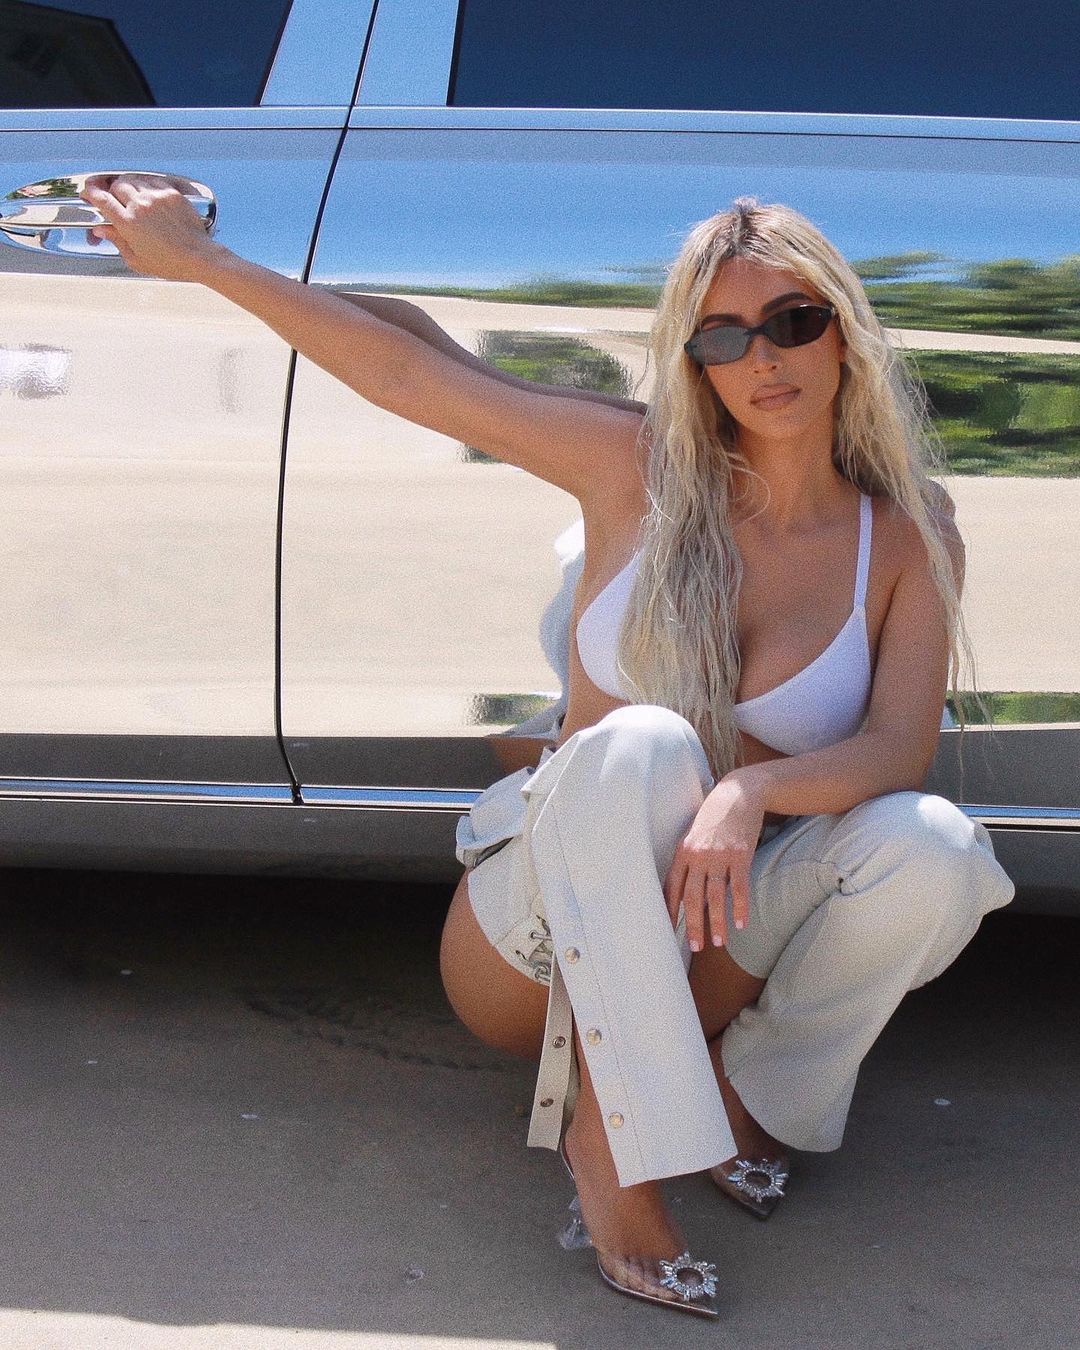 Kim has evolved towards silver and nude-grey colored cars much like her fashion